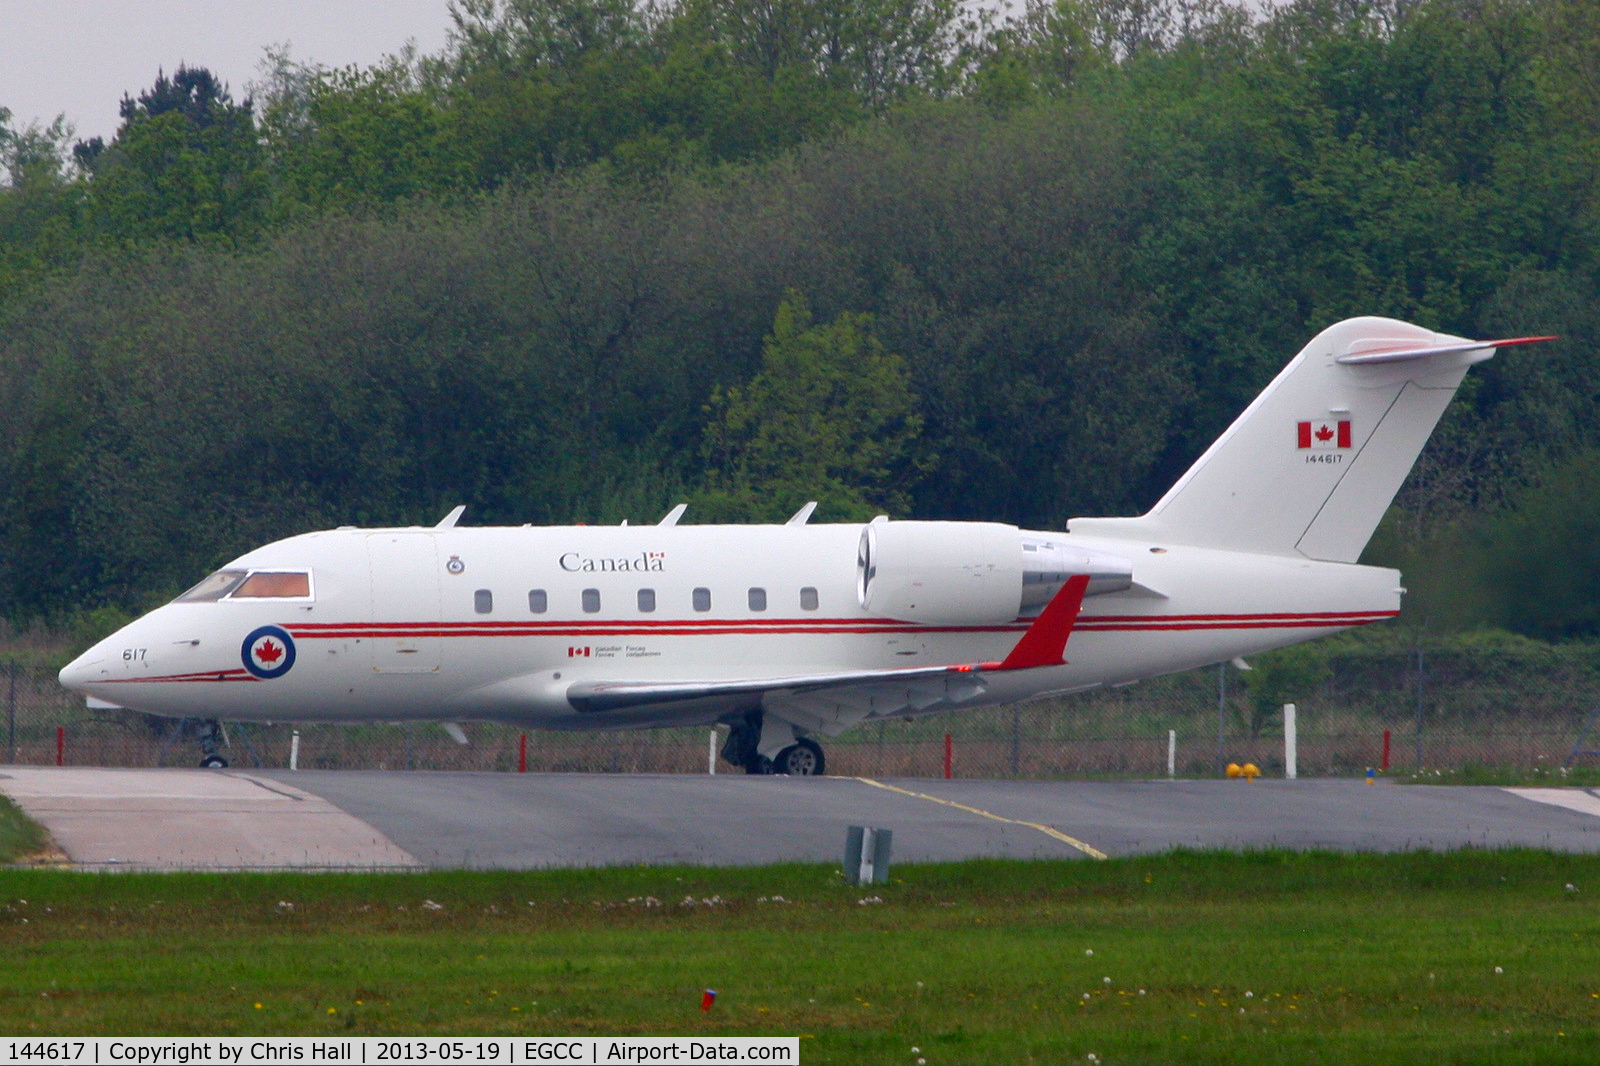 144617, 2002 Bombardier CC-144C Challenger (604/CL-600-2B16) C/N 5533, No. 412 Transport Squadron of the Royal Canadian Air Force